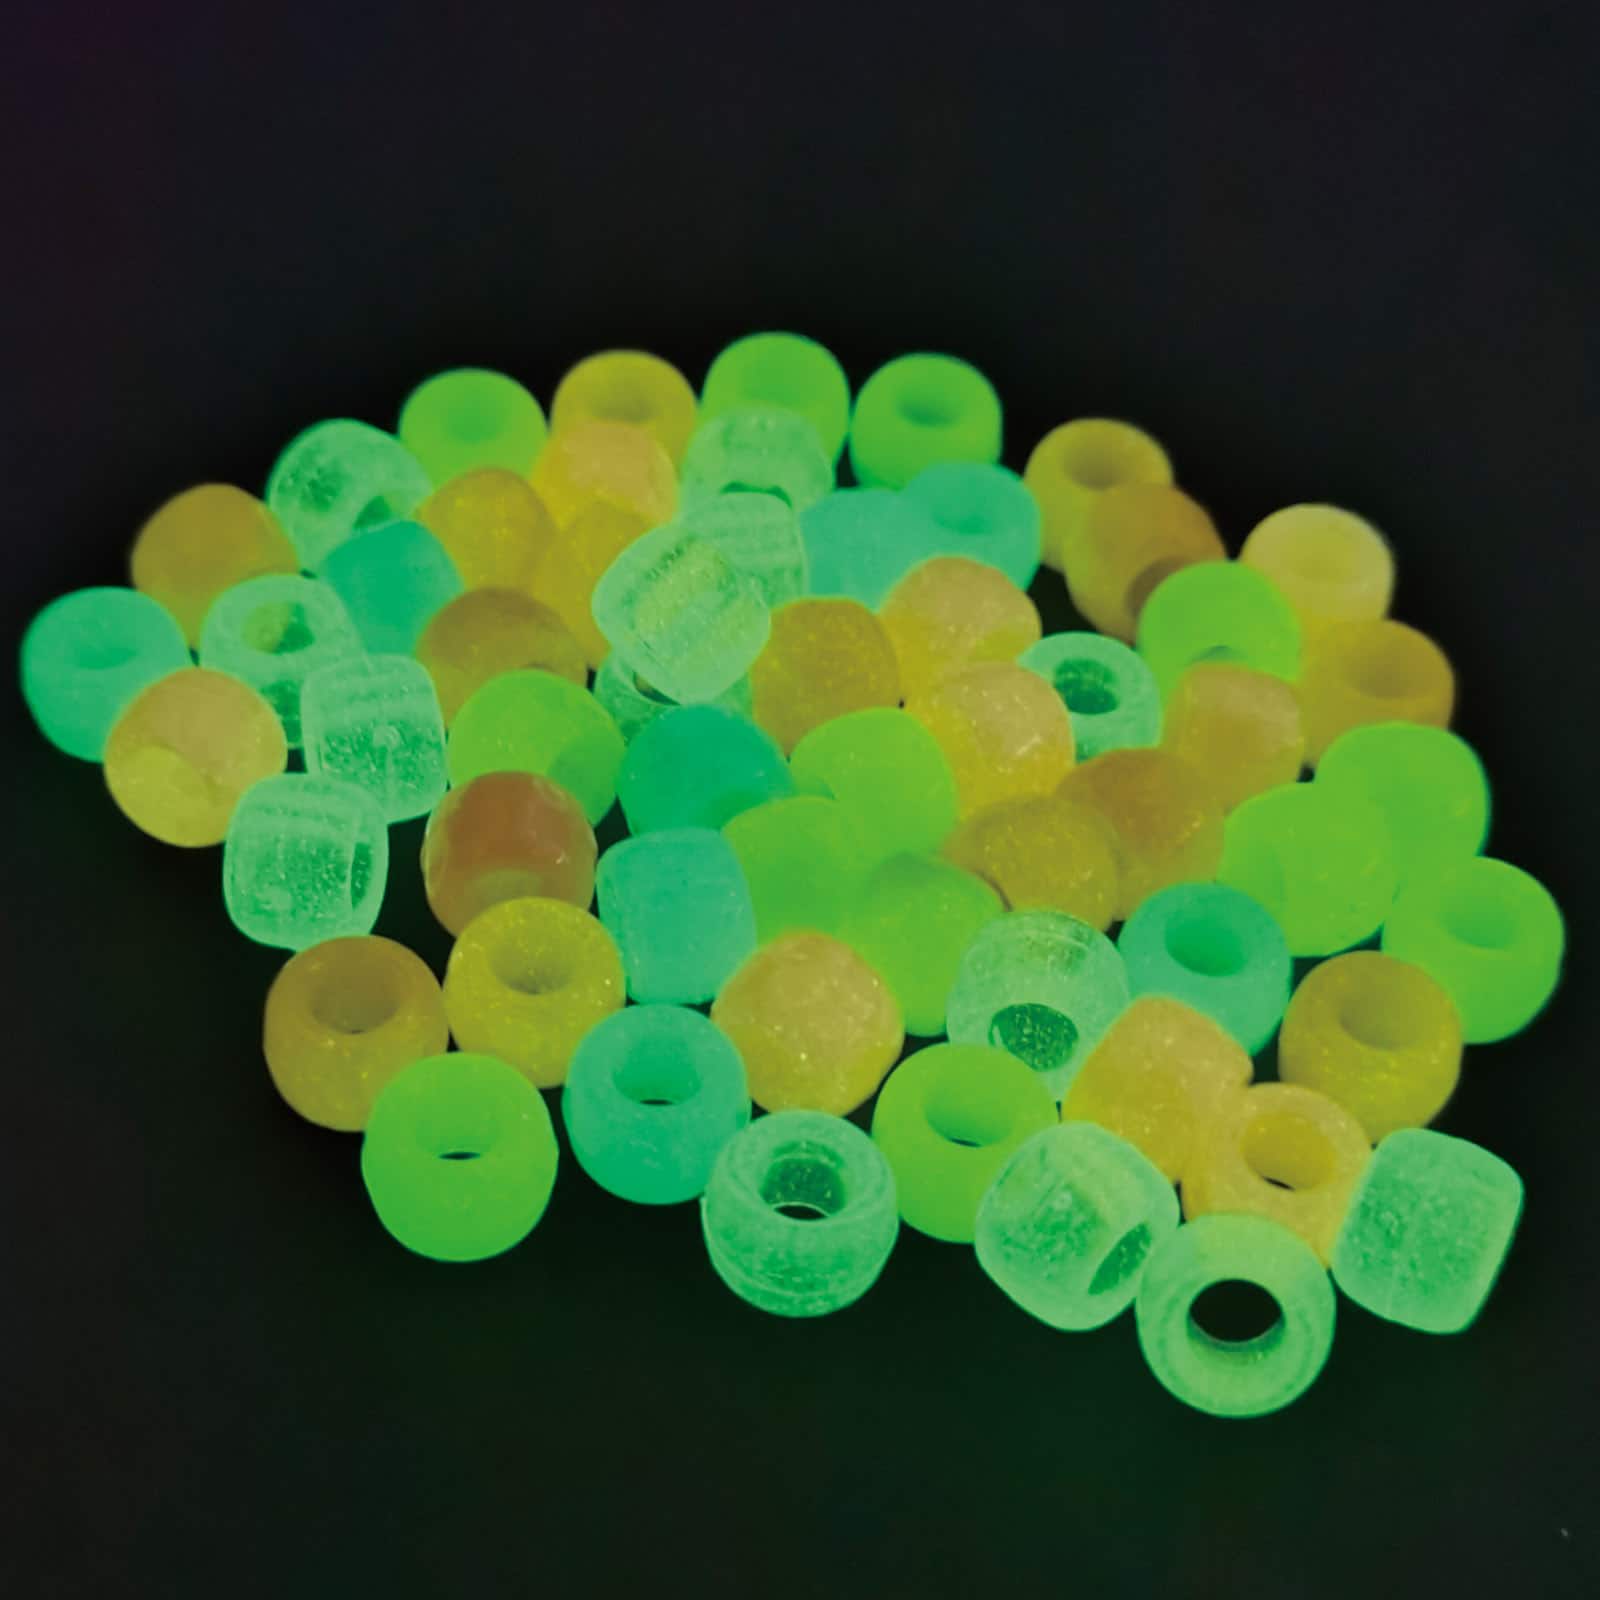 Creatology 6mm x 9mm Glow in The Dark Pony Beads - Each